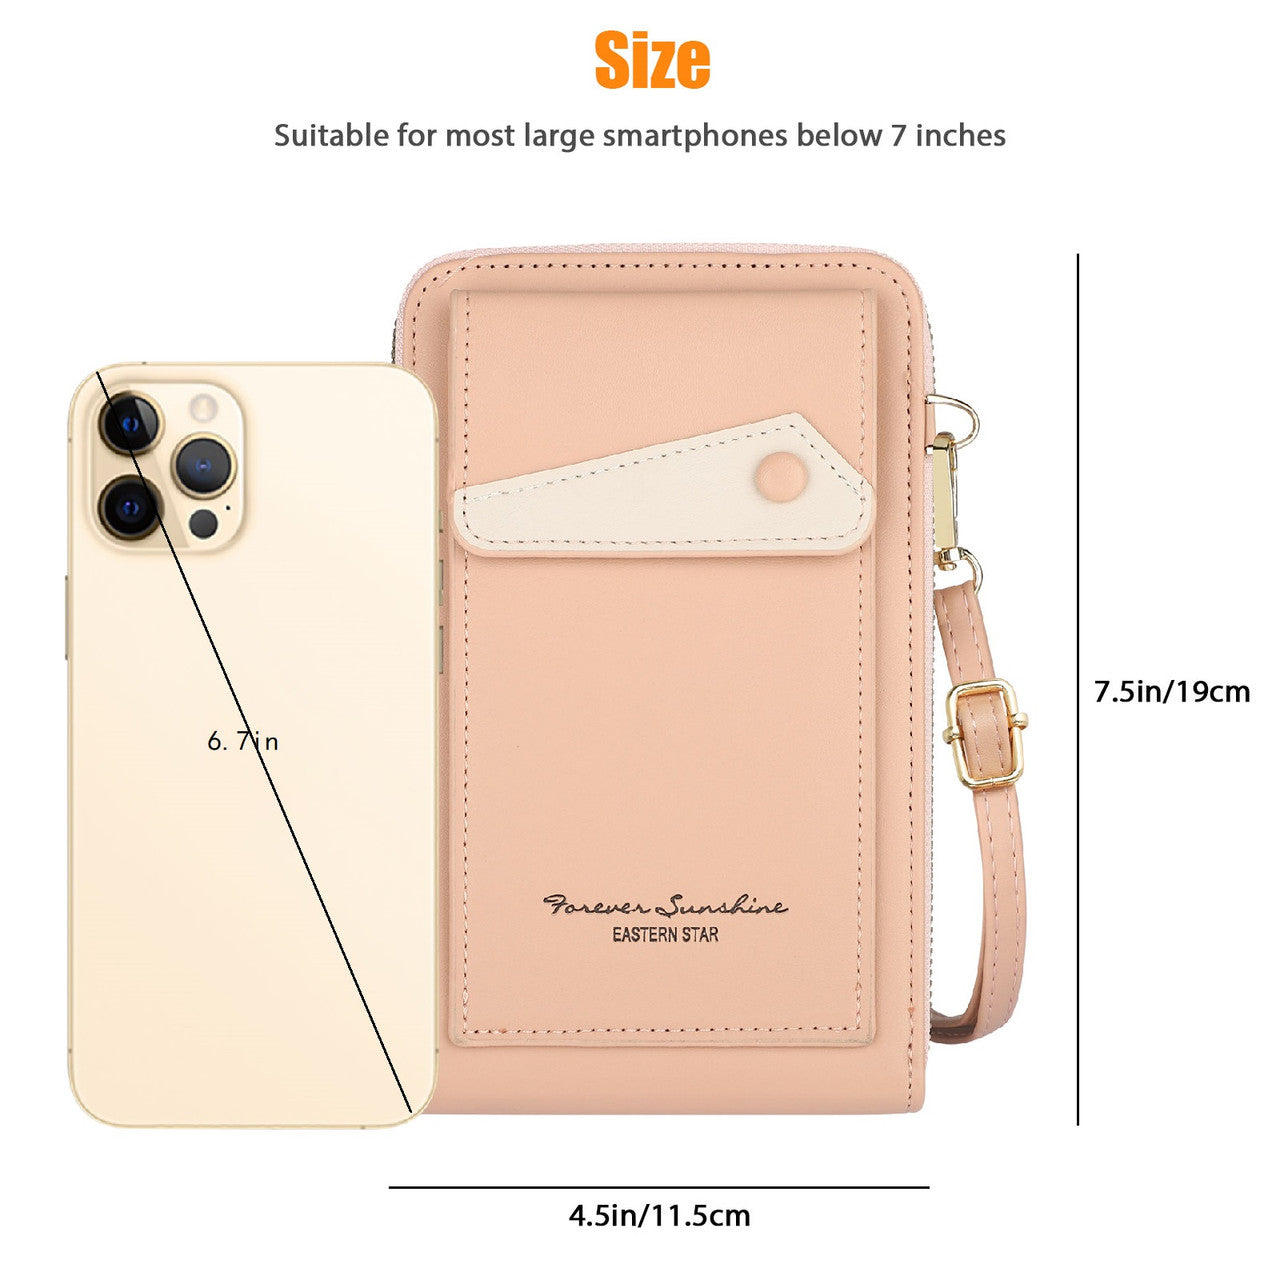 Small Crossbody Cell Phone Purse for Women-Mobile Phone Wallet Lanyard Handbag with Shoulder Wrist Strap, Waterproof Phone